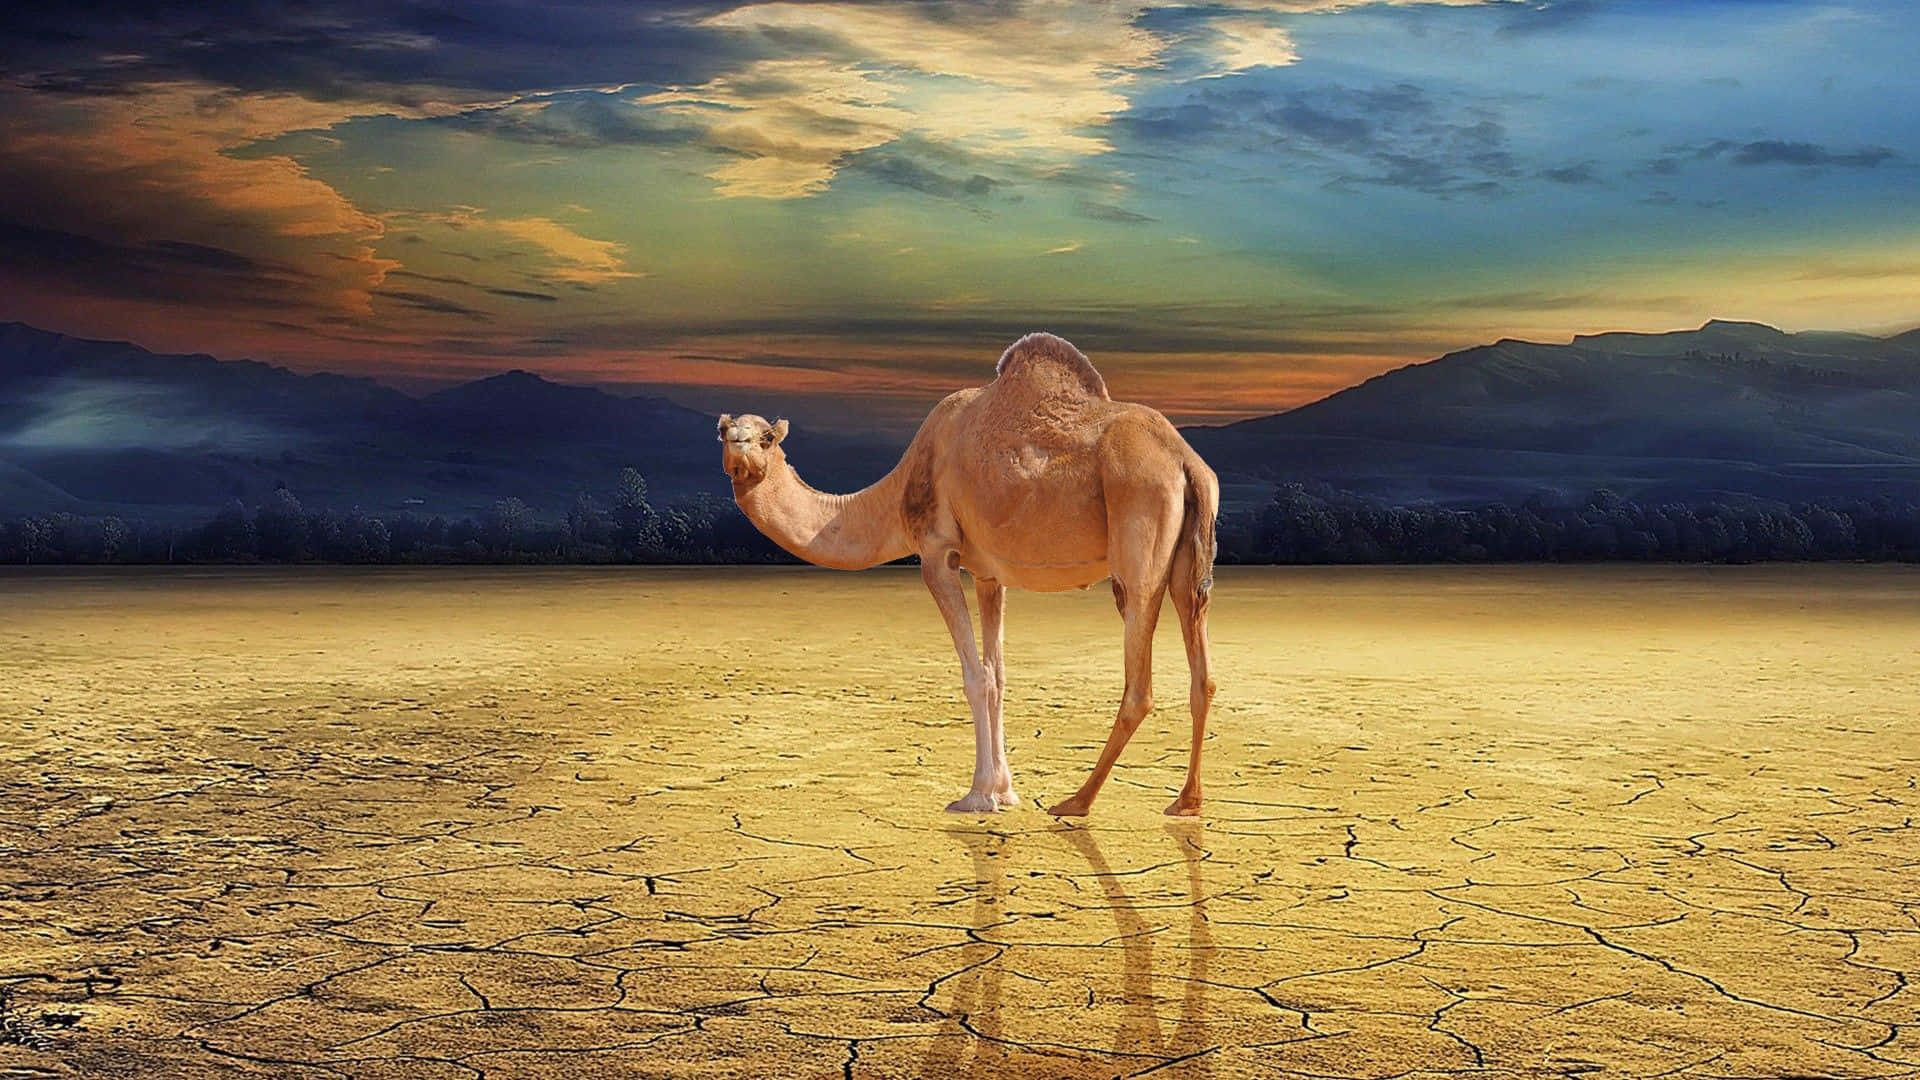 a camel is standing in a dry field